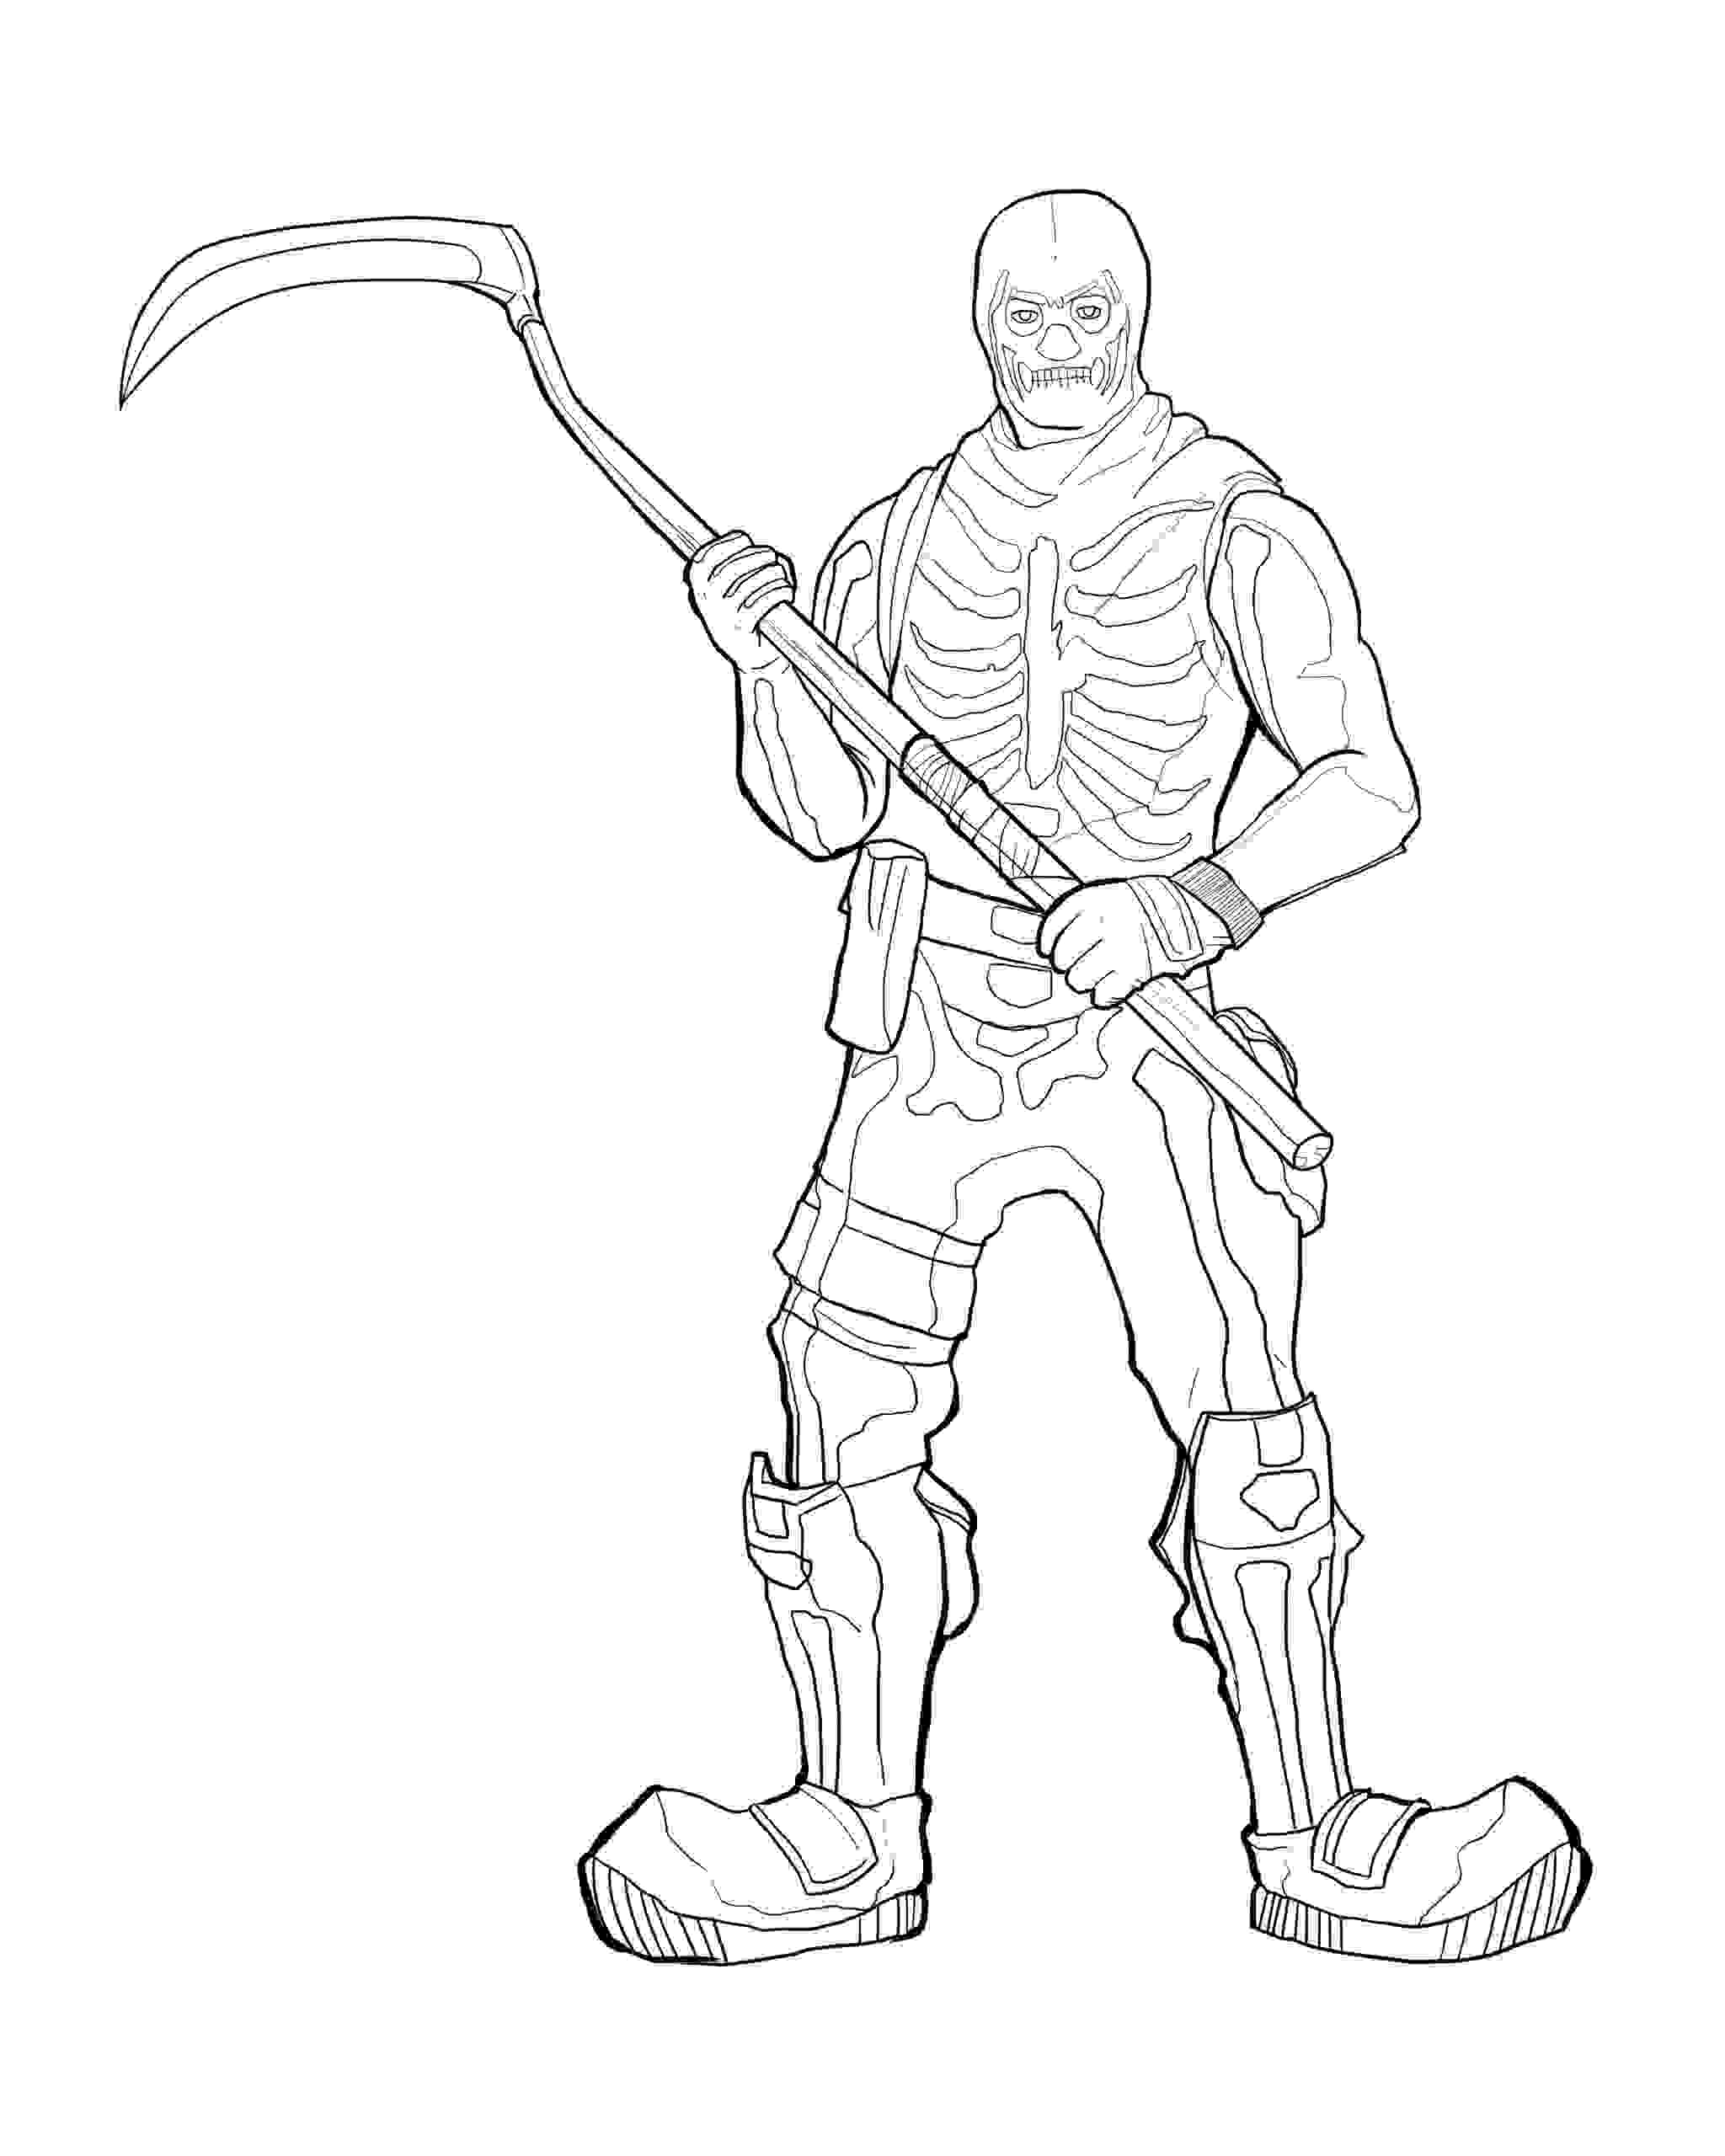 Skull Trooper has a Rare Harvesting Tool in Fortnite Coloring Page